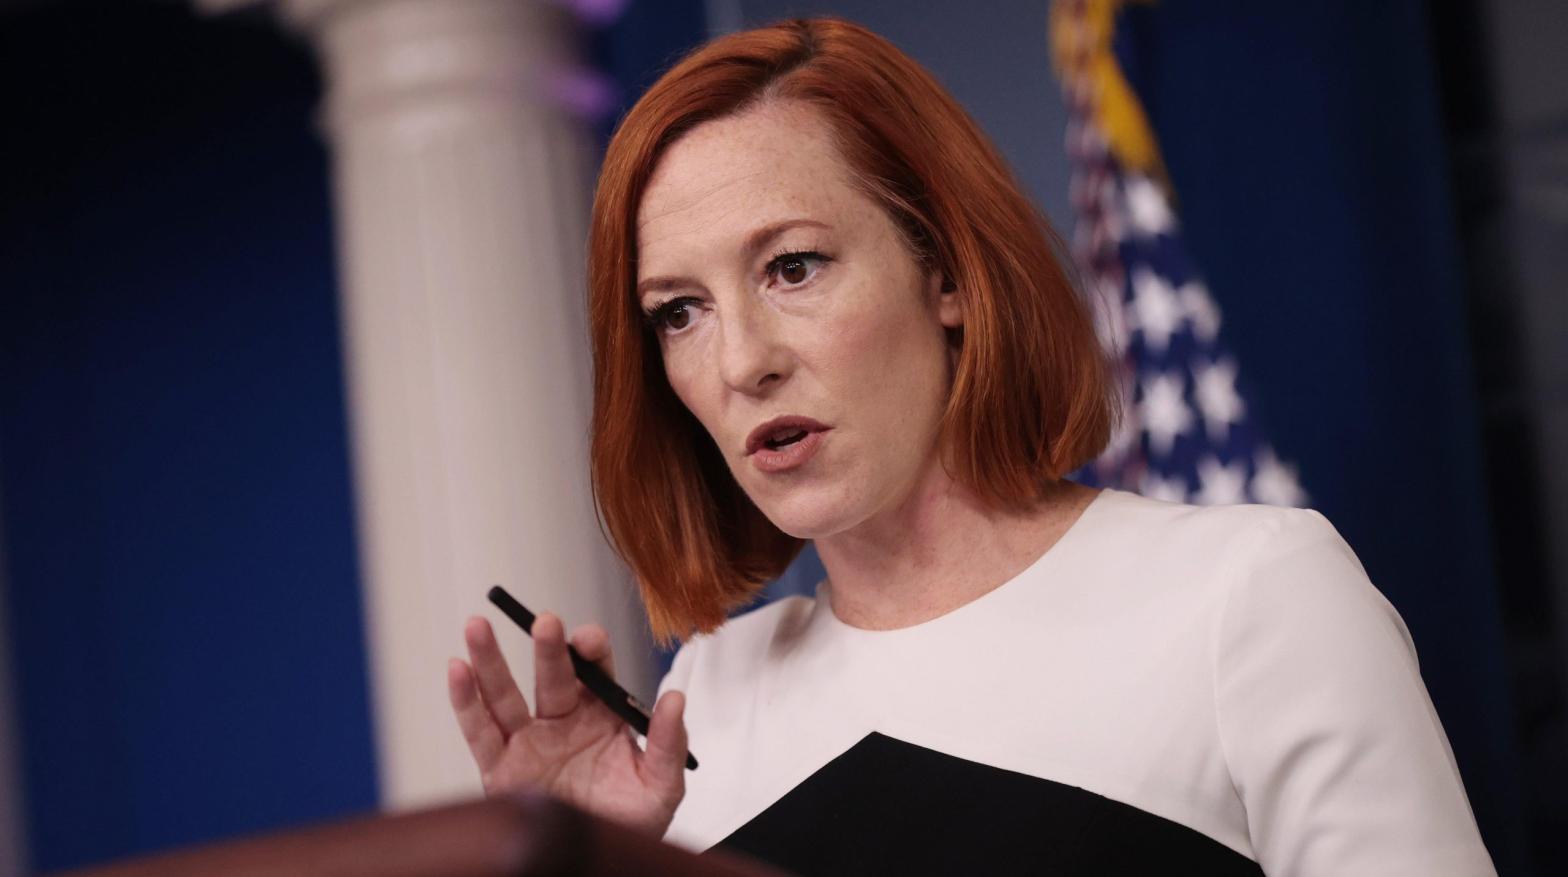 White House Press Secretary Jen Psaki talks to reporters during the daily press conference in the Brady Press Briefing Room at the White House on December 6, 2021 in Washington, D.C. (Photo: Chip Somodevilla, Getty Images)